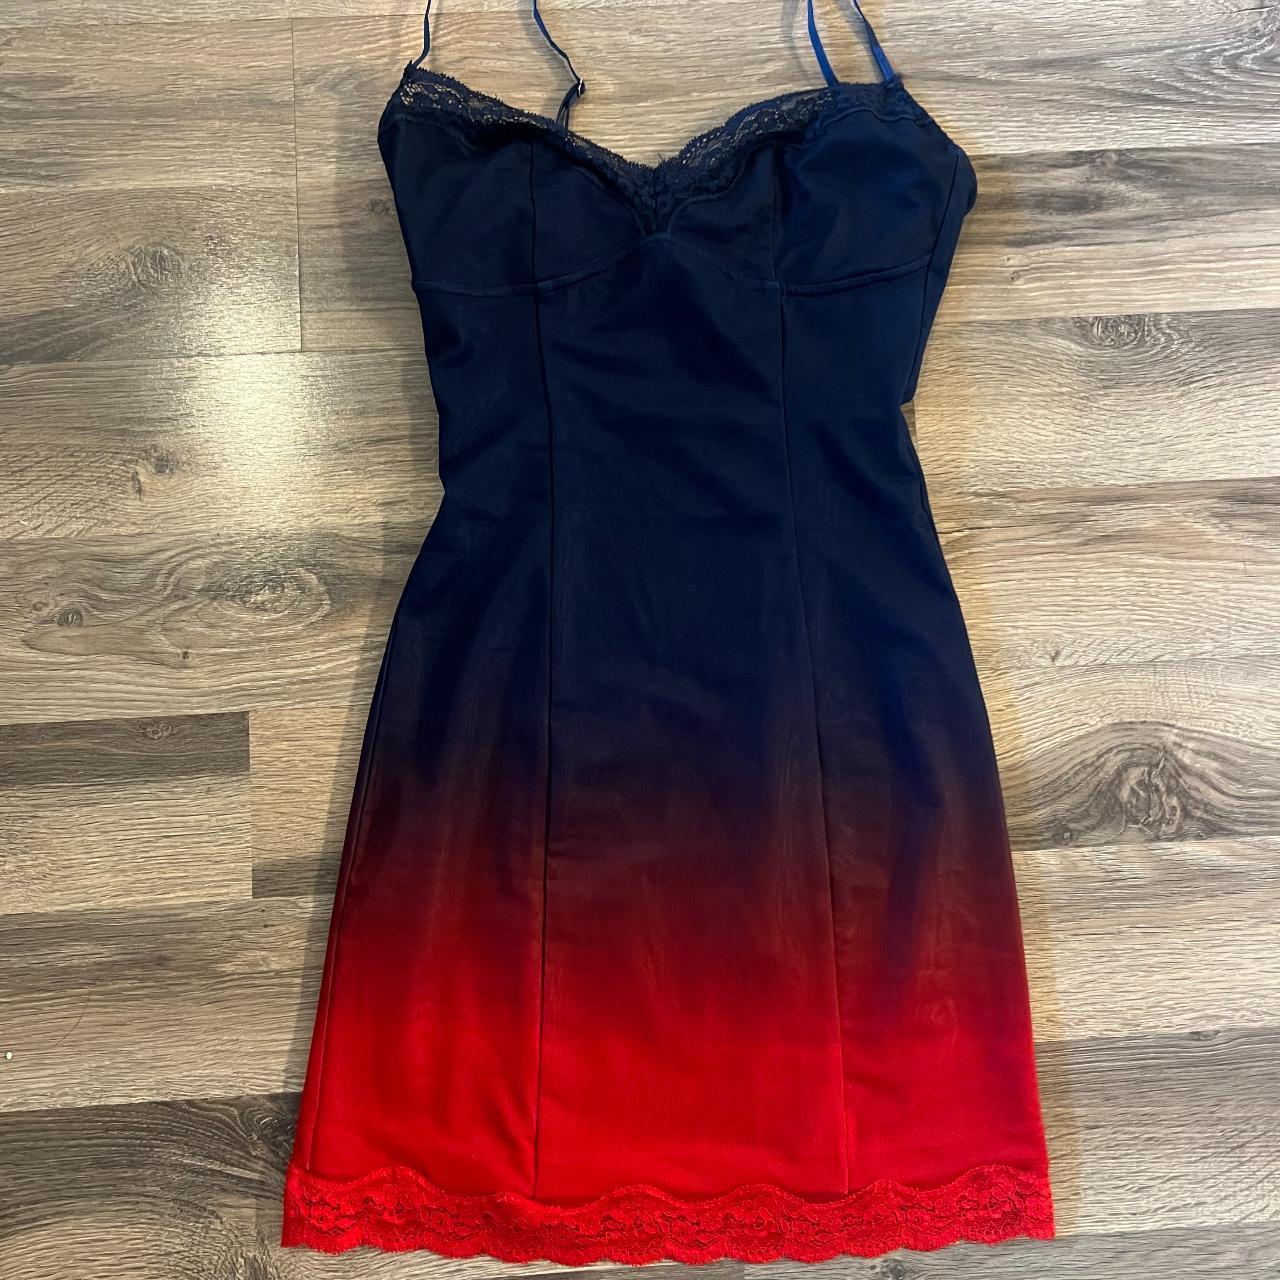 Ombré IAMGIA Gianna dress in navy to hot pink!!💘Only - Depop